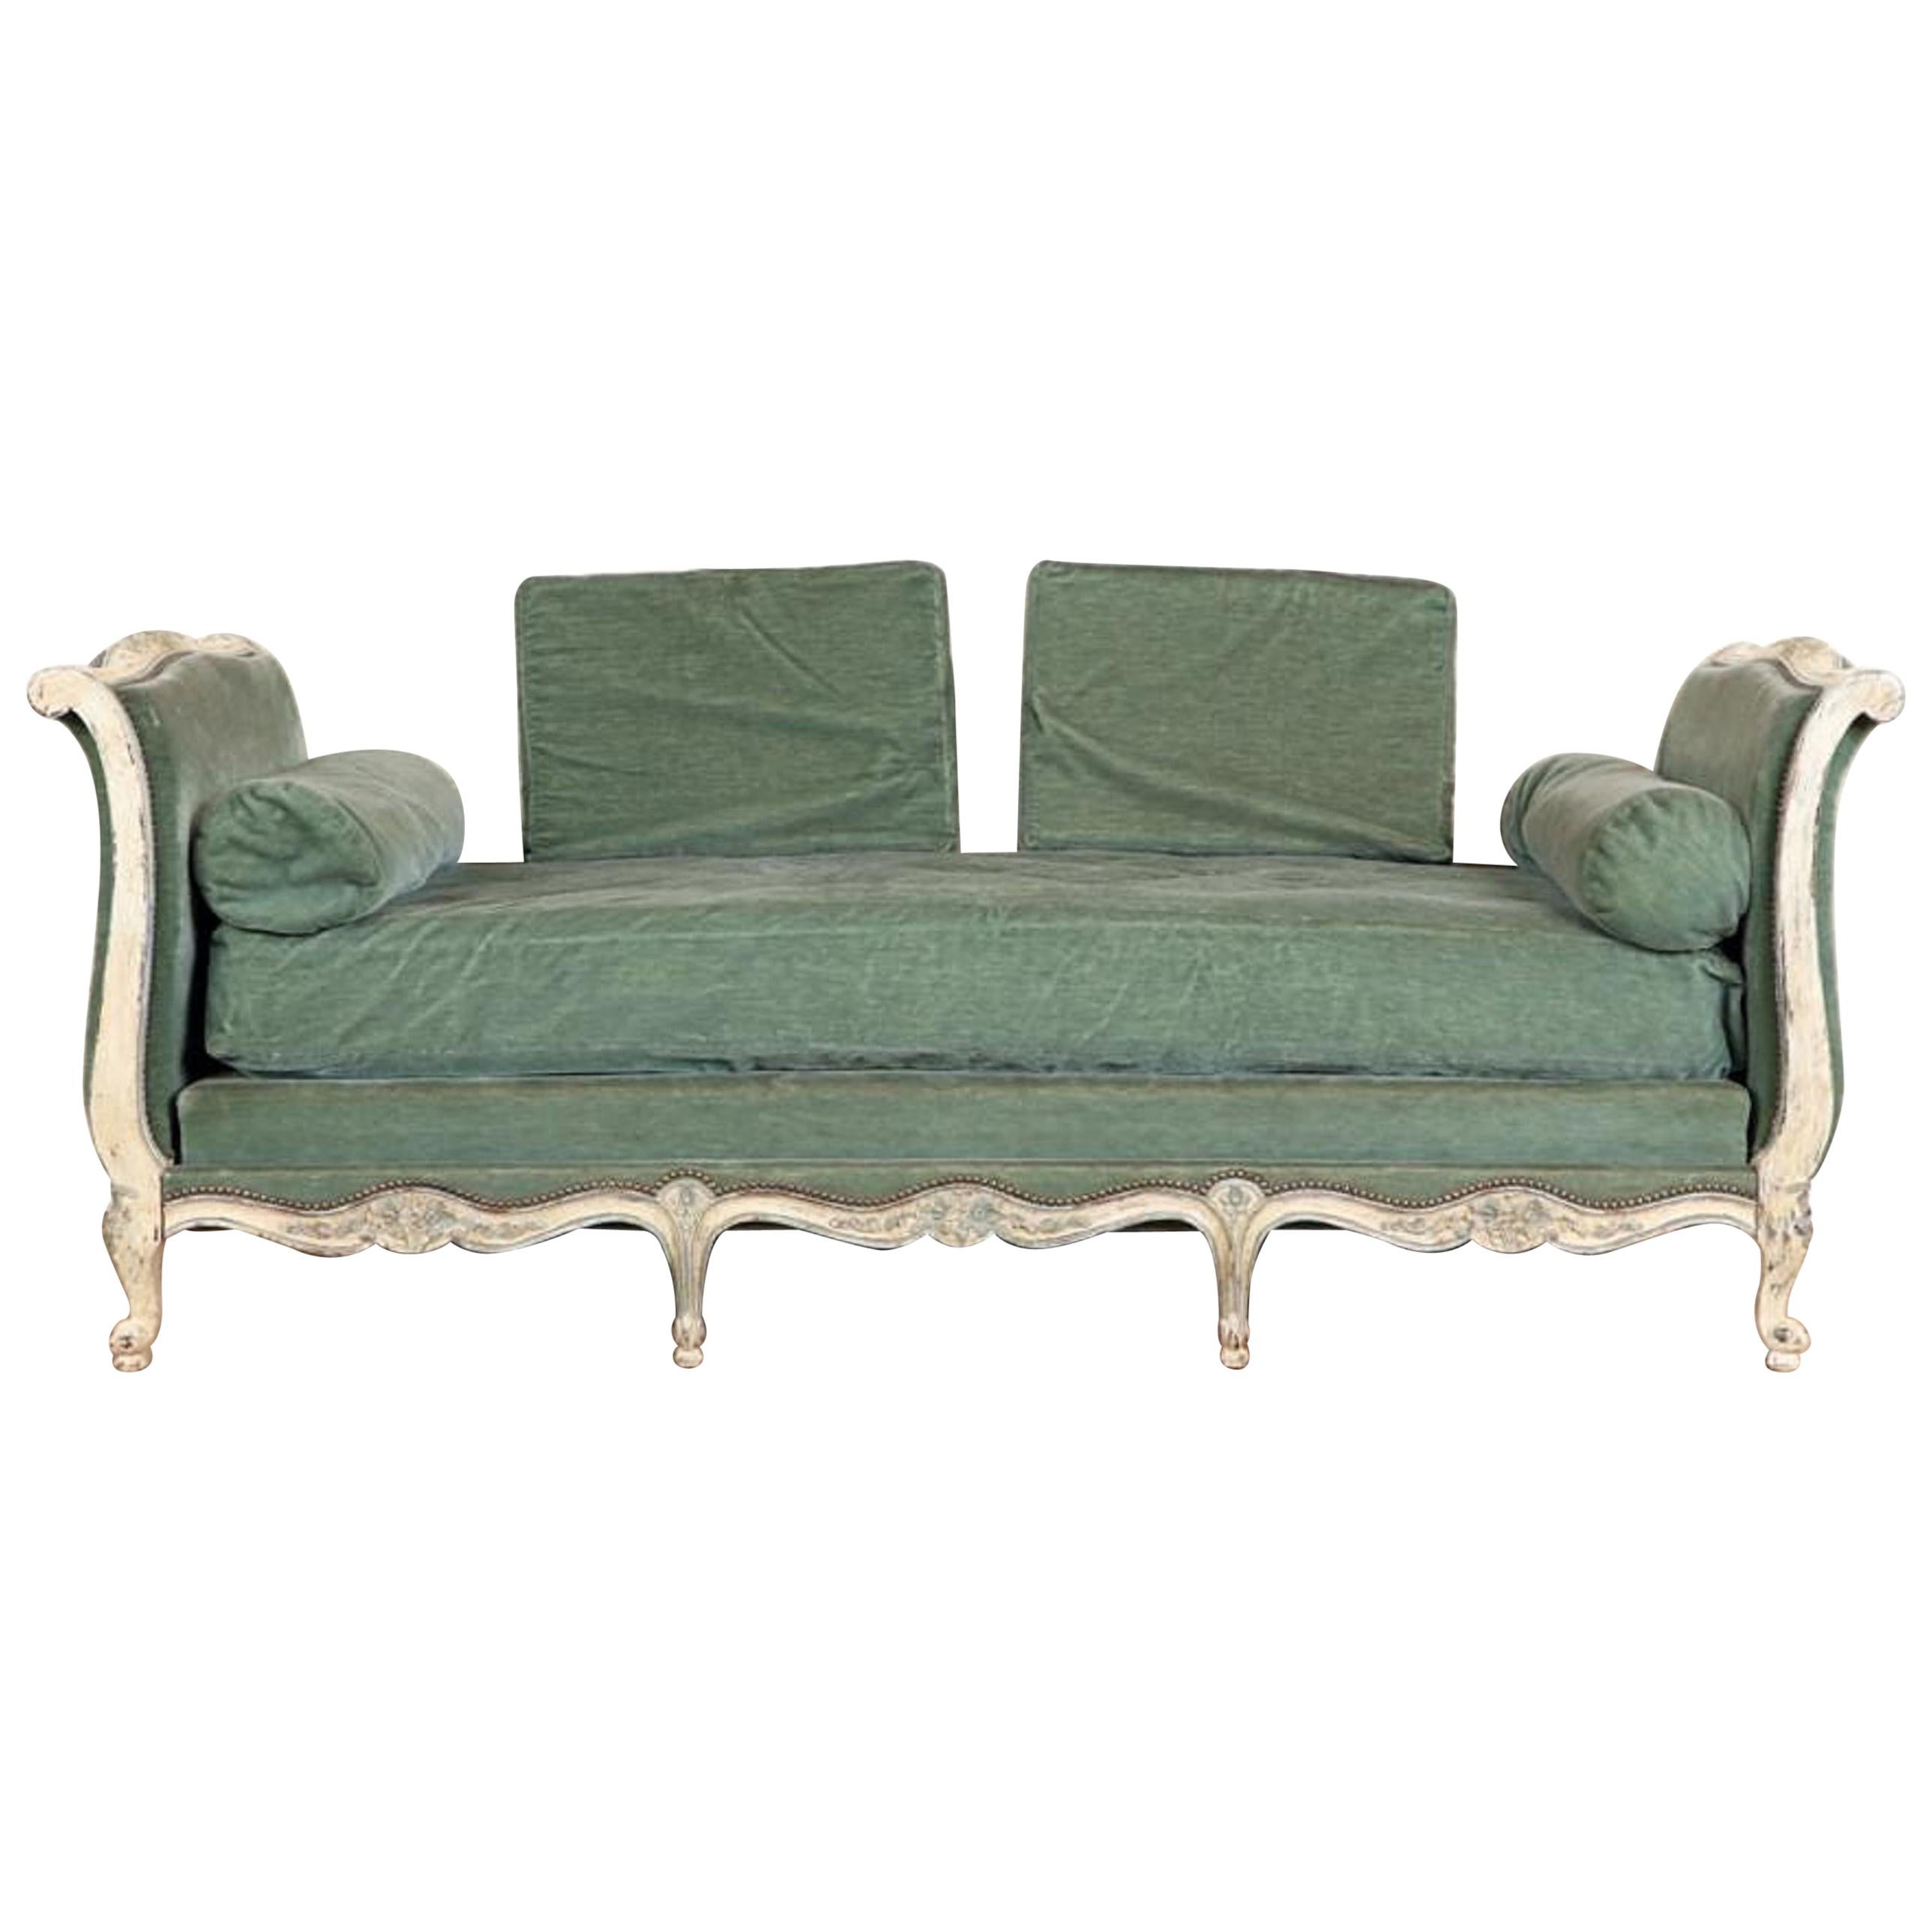 Louis XV Style Daybed